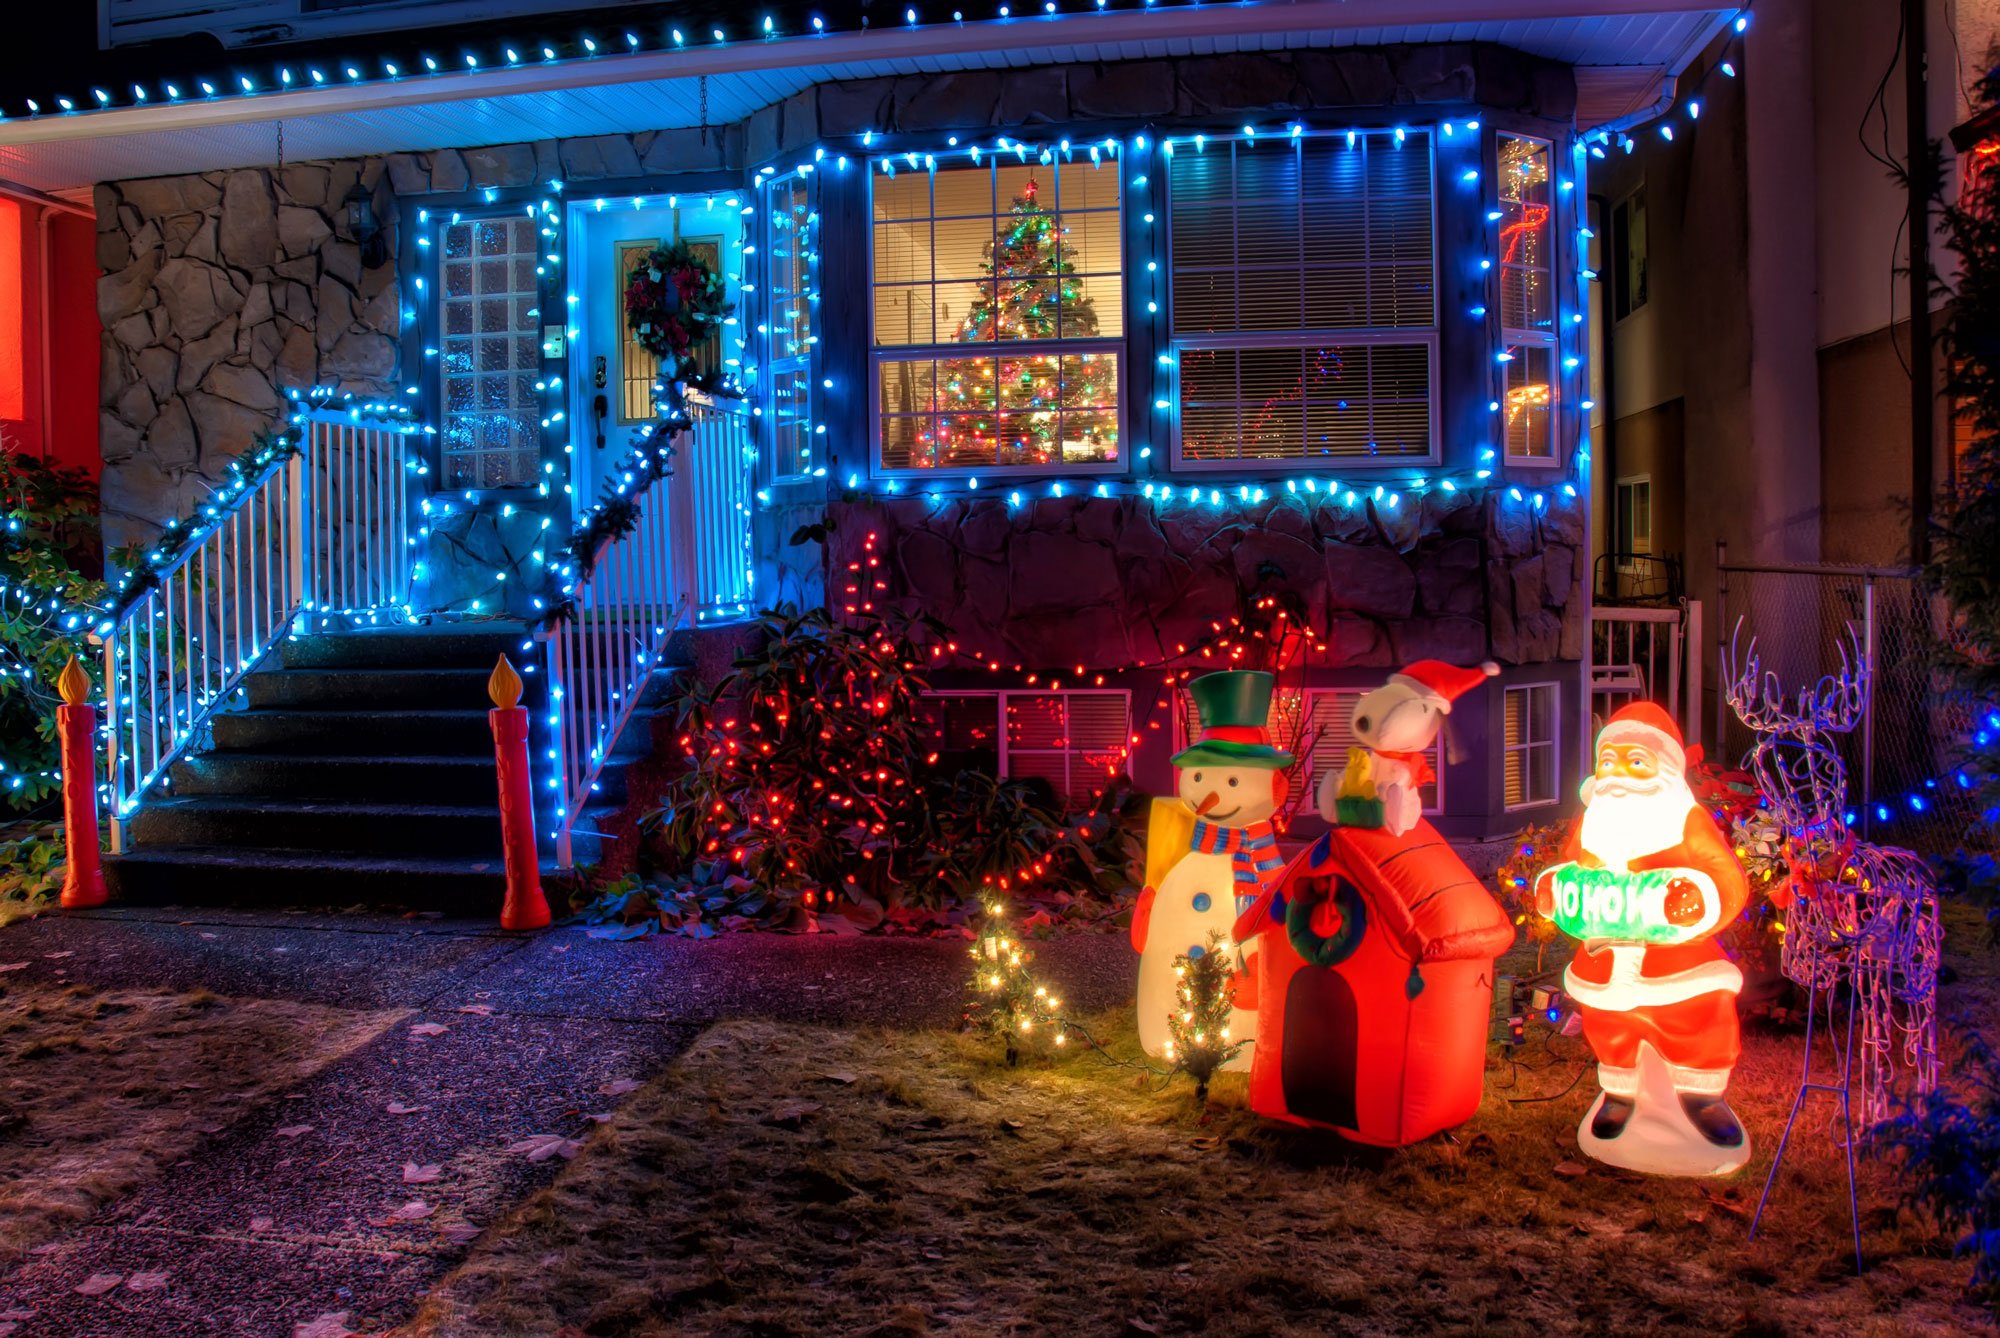 How to store Christmas lights according to experts